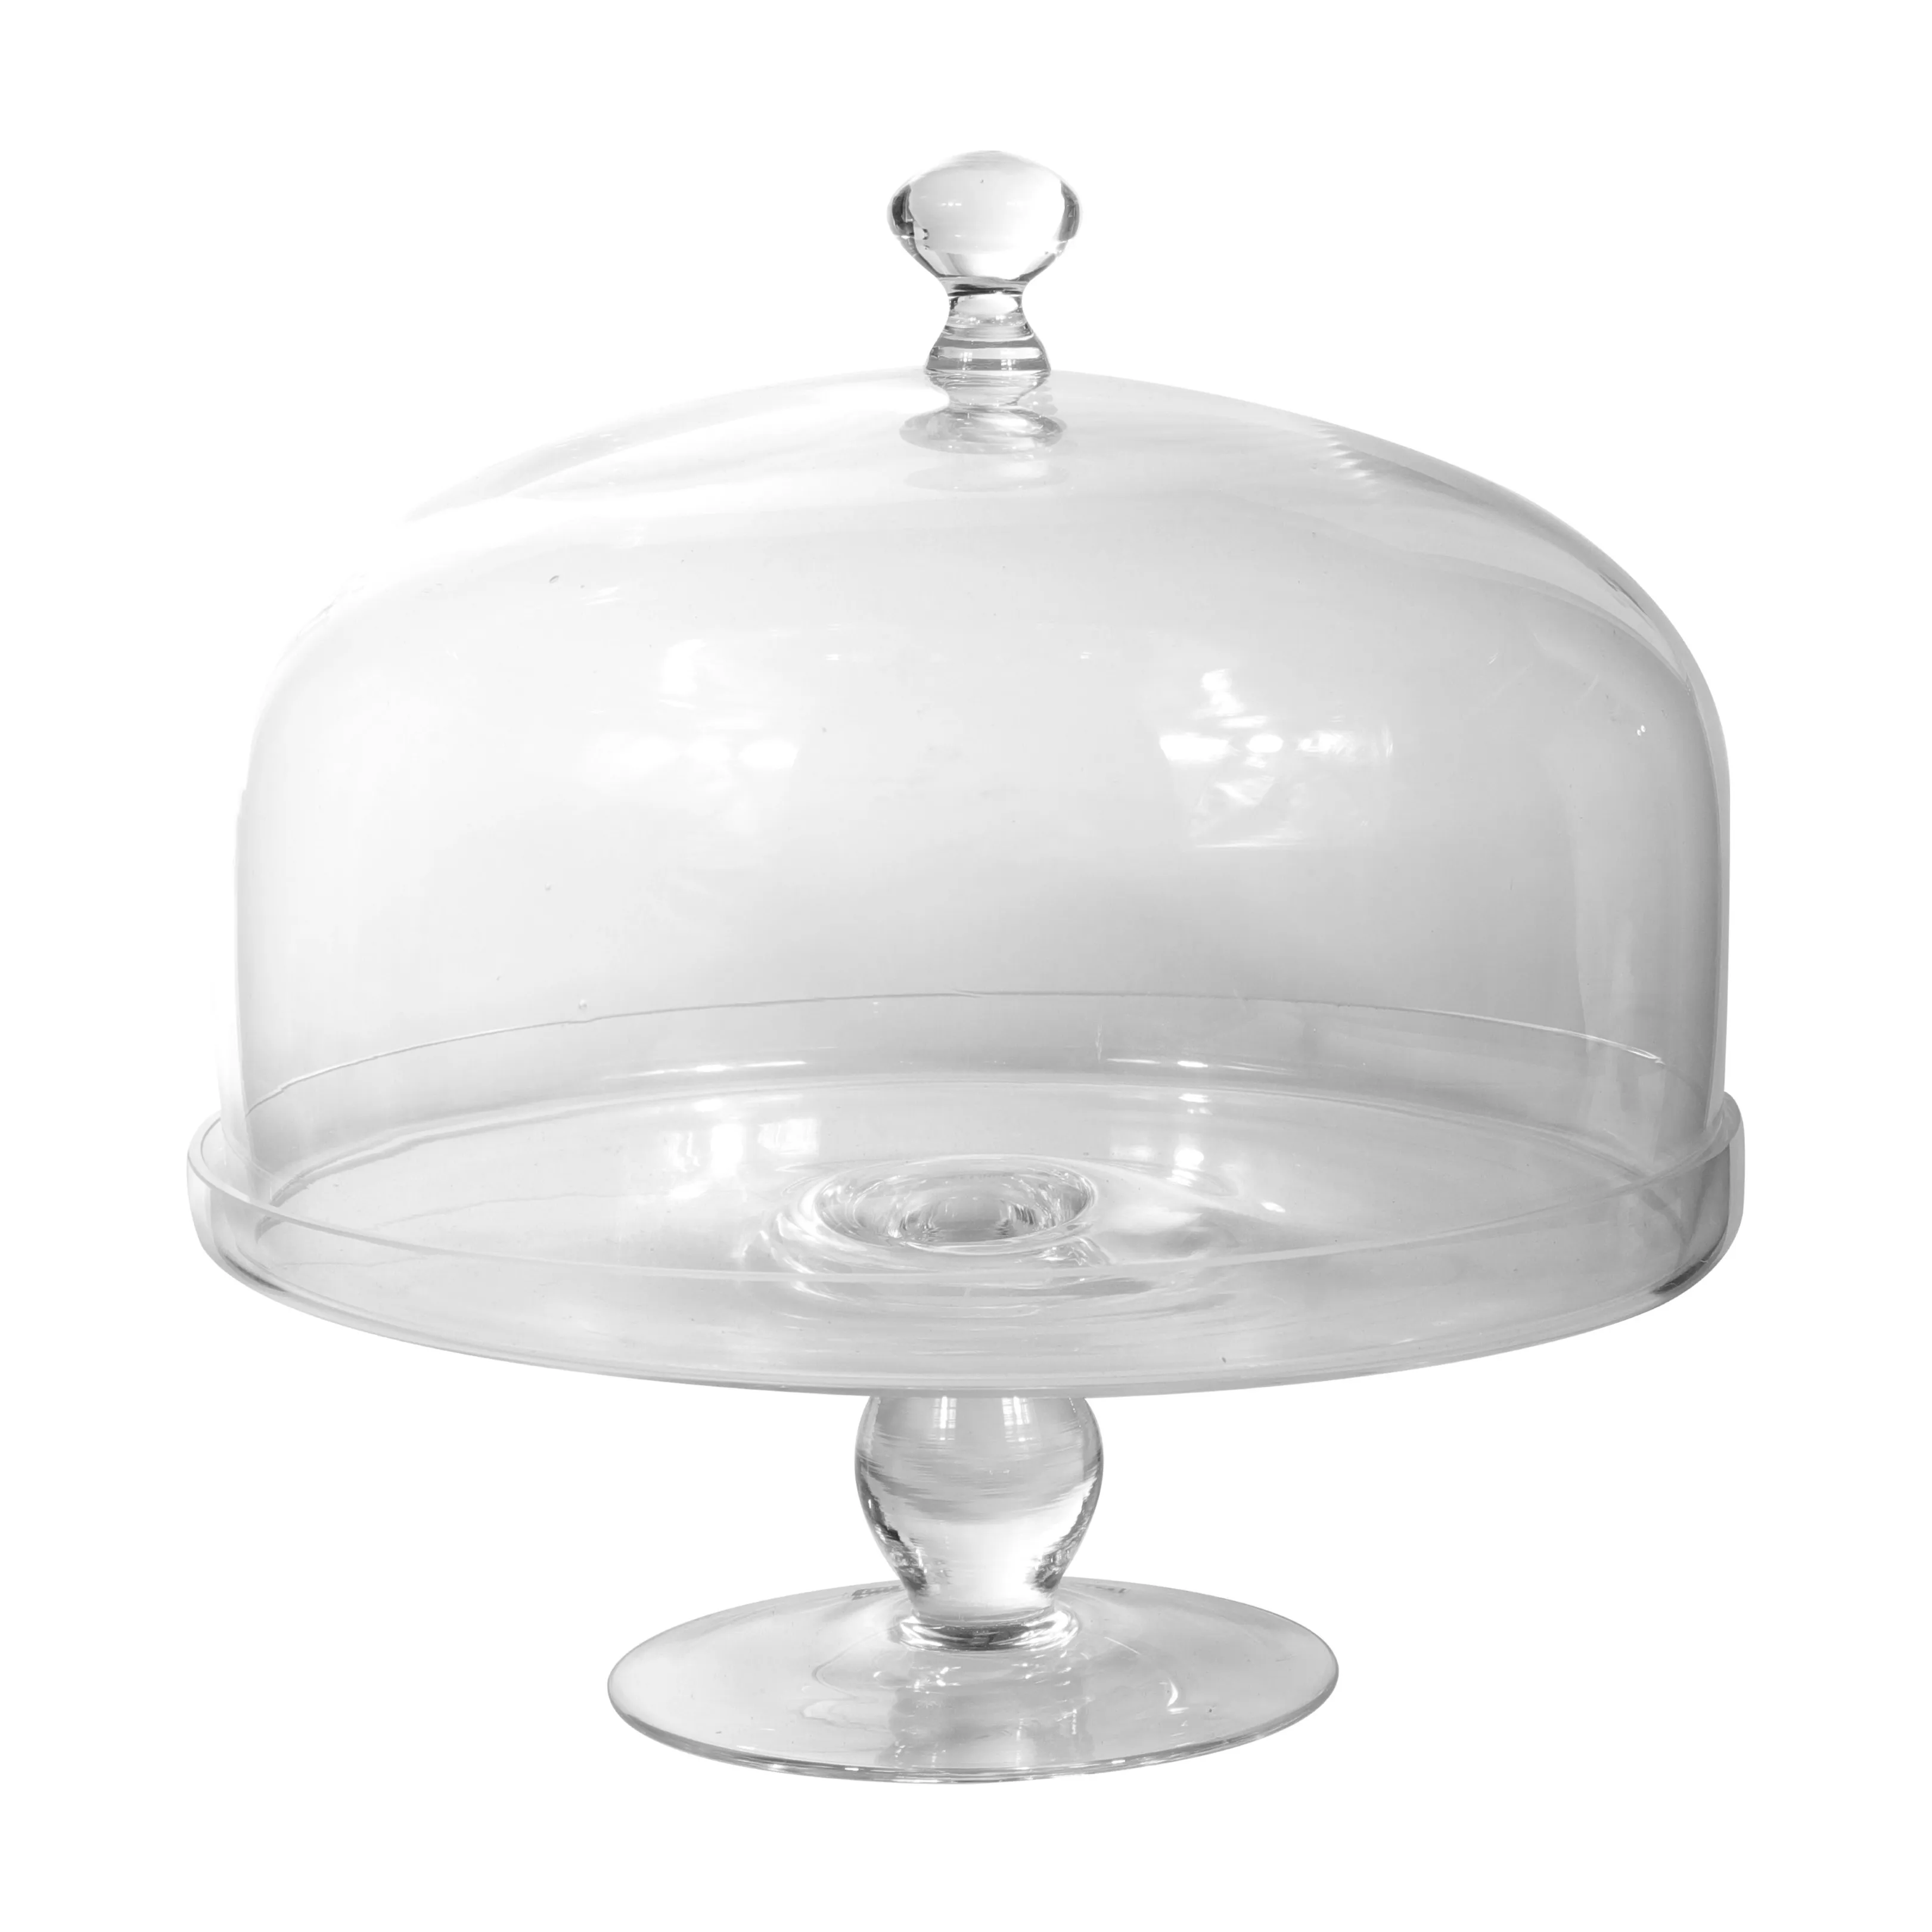 Royalford  RF9324 Classic Collection 28cm Ceramic Cake Stand with Glass Dome, Cake Storage, Glass Cake Stand